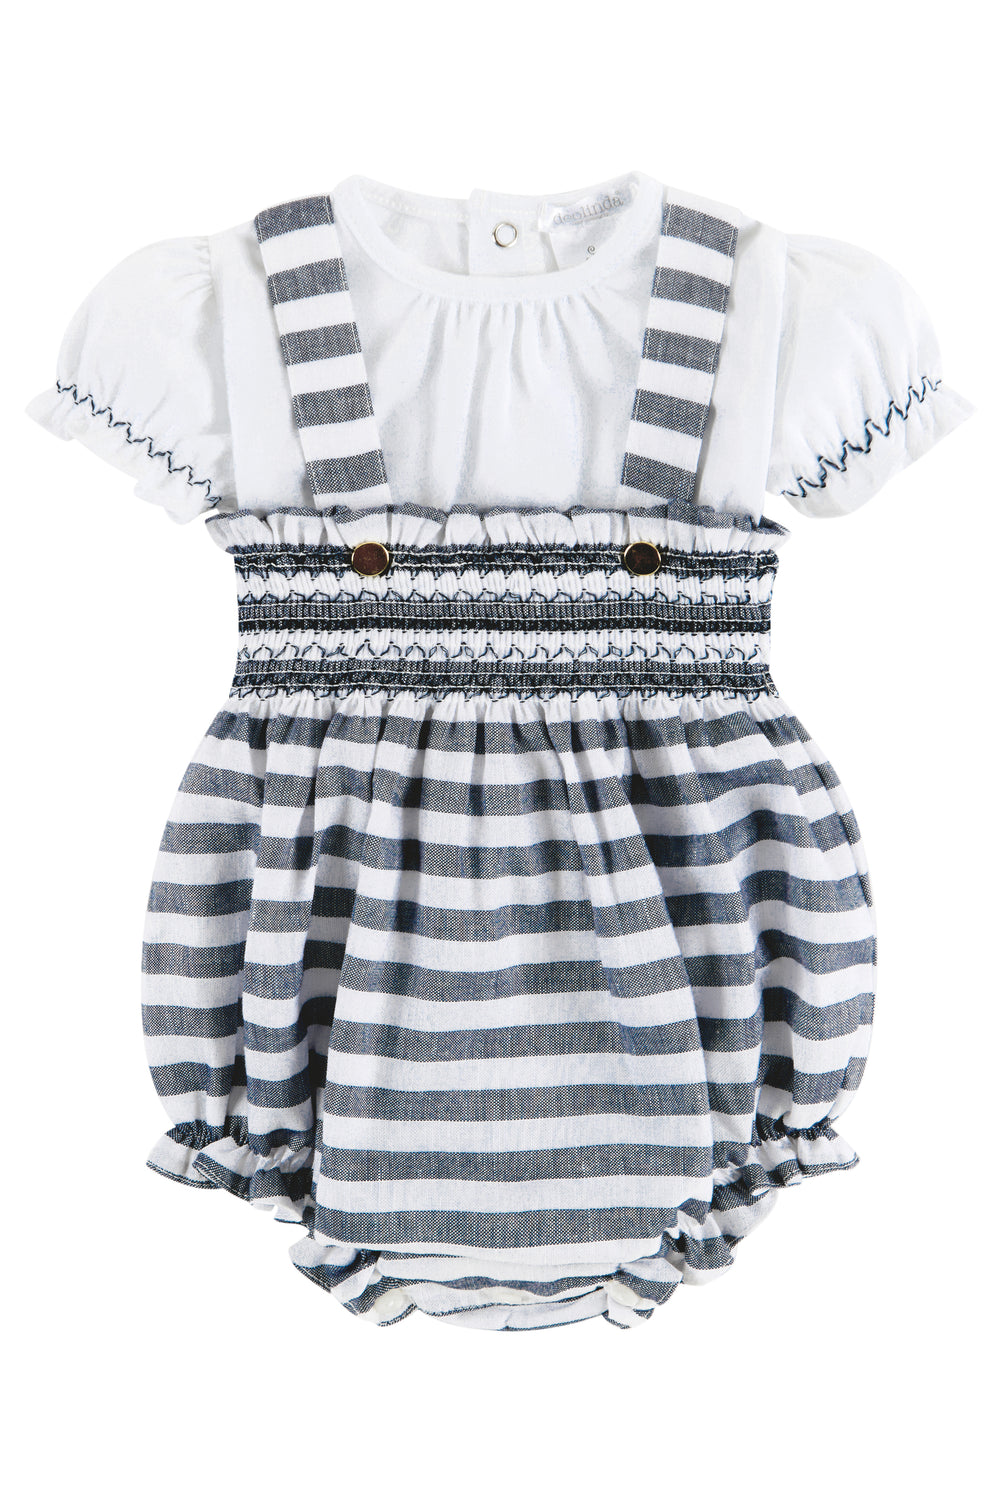 Deolinda "Romani" Blouse & Navy Striped Shortie | iphoneandroidapplications